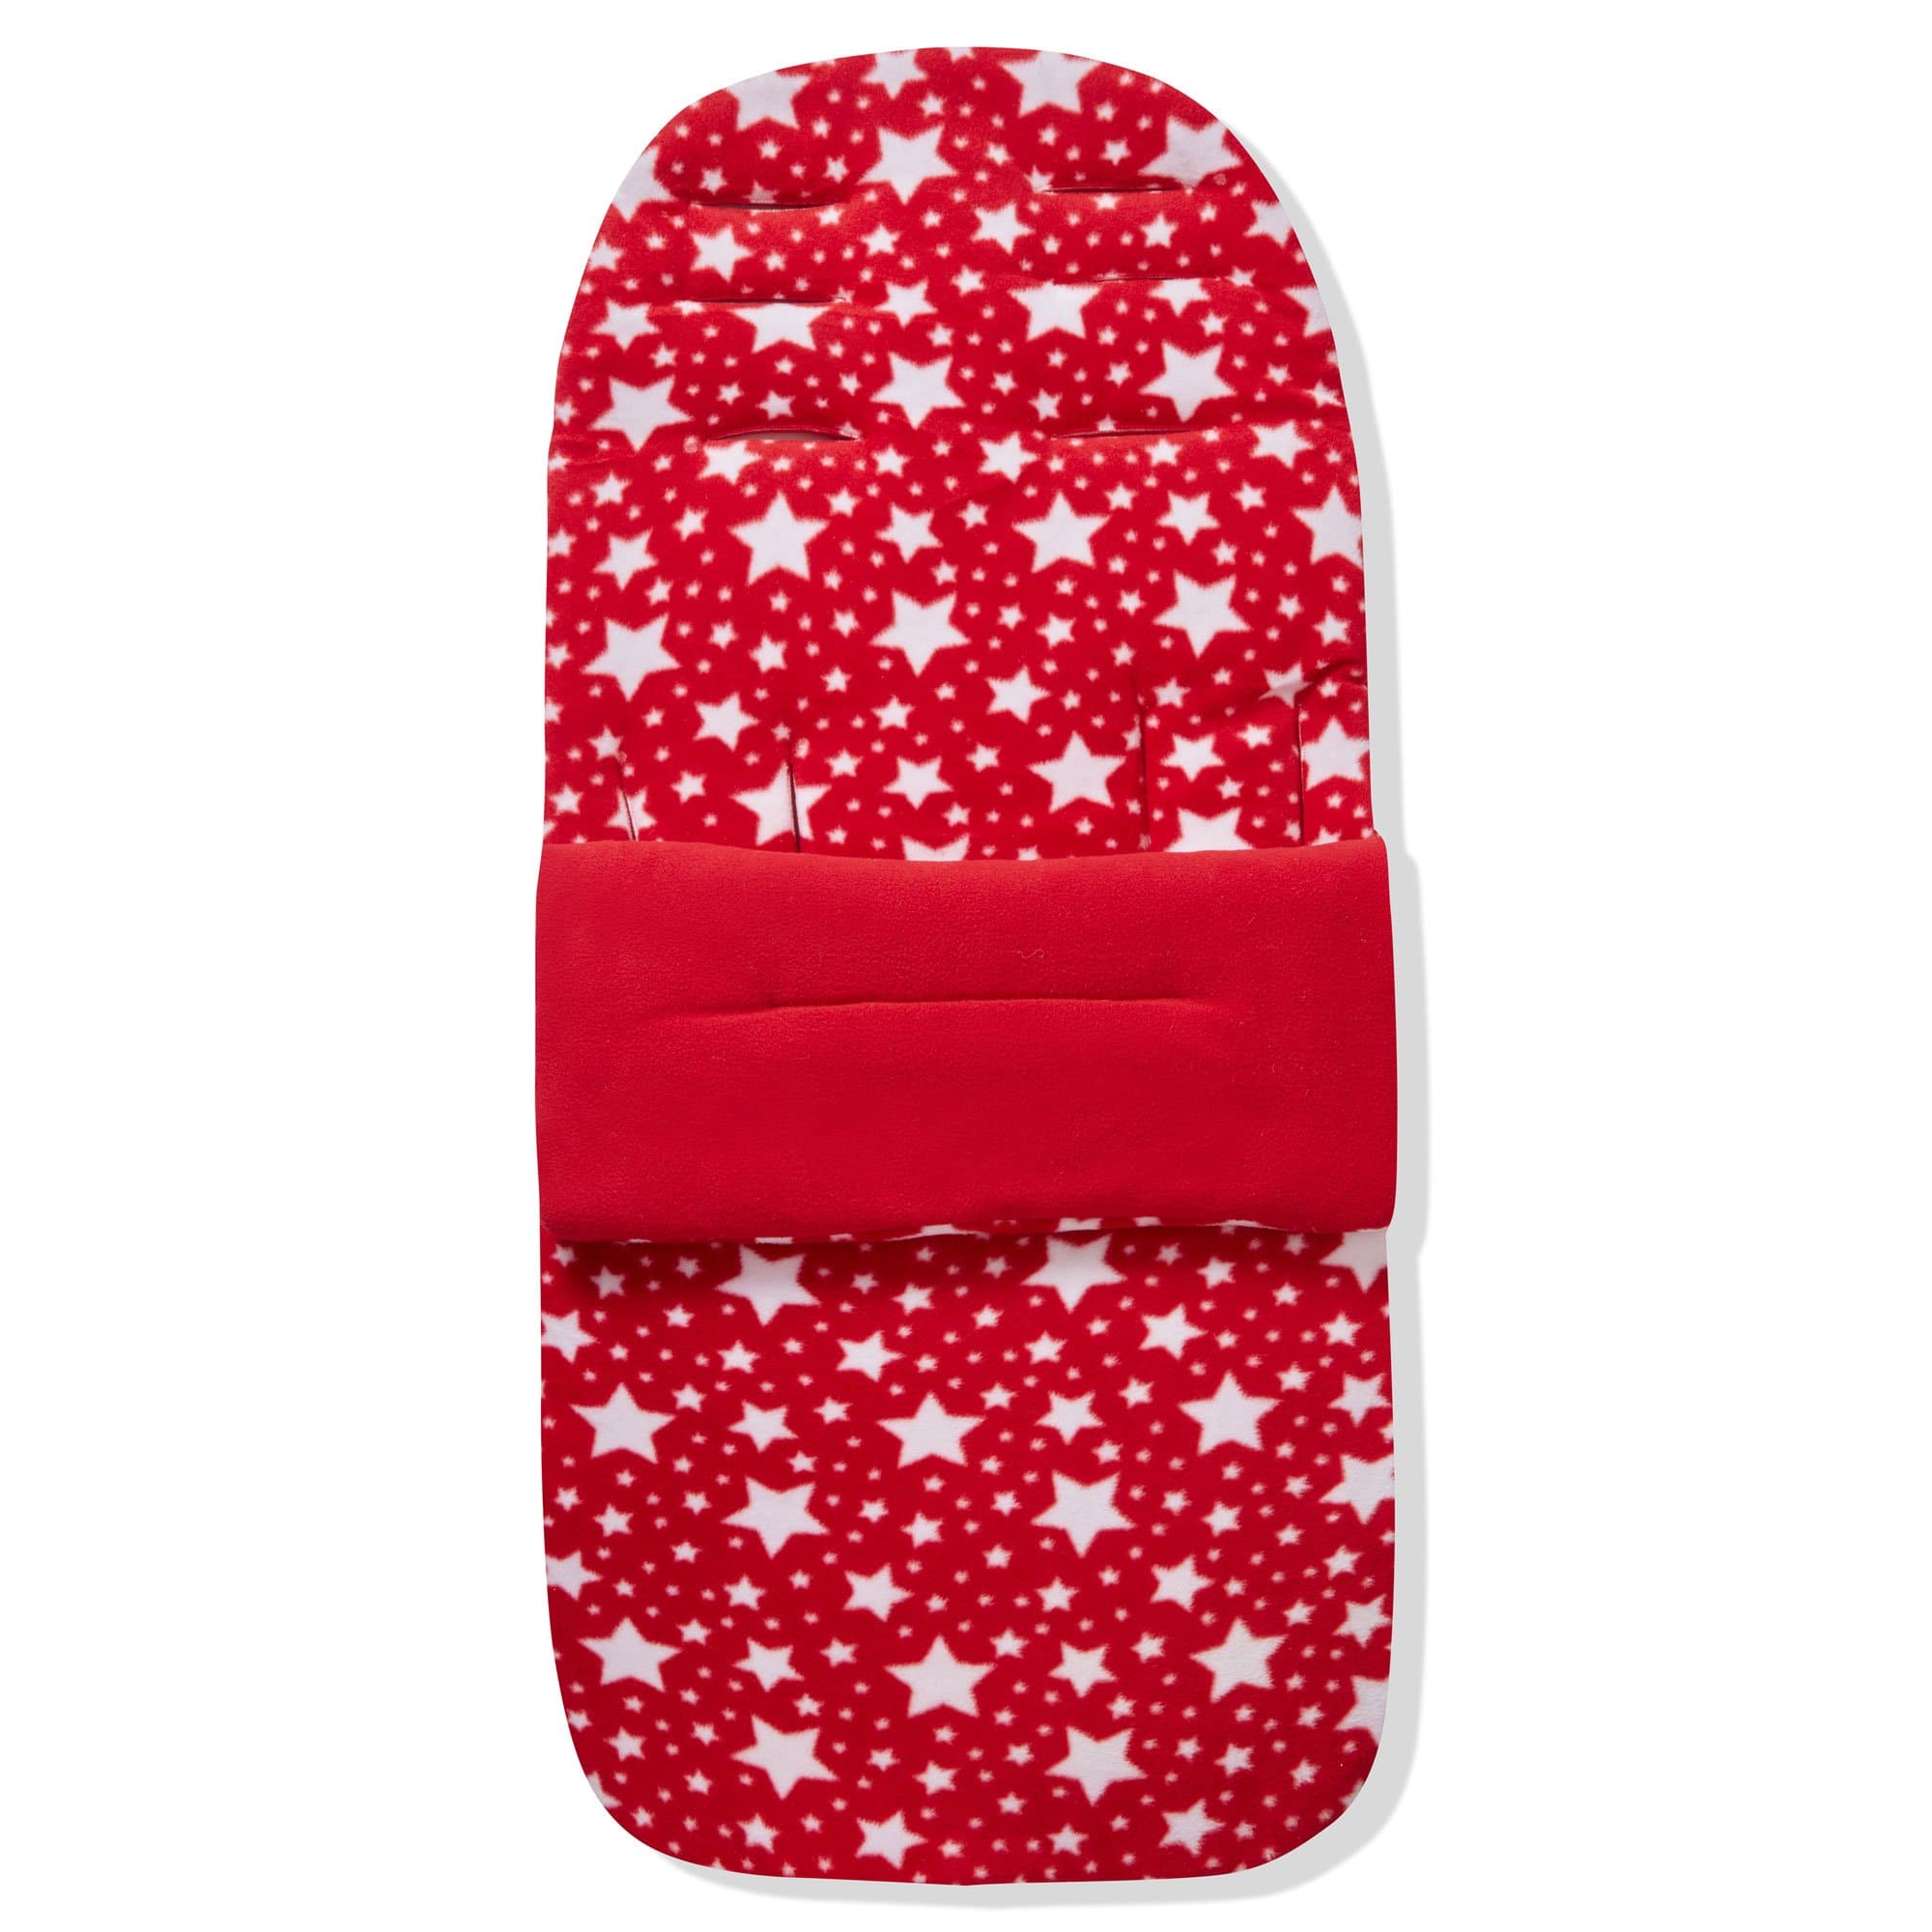 Fleece Footmuff / Cosy Toes Compatible with Kiddicare - Red Star / Fits All Models | For Your Little One